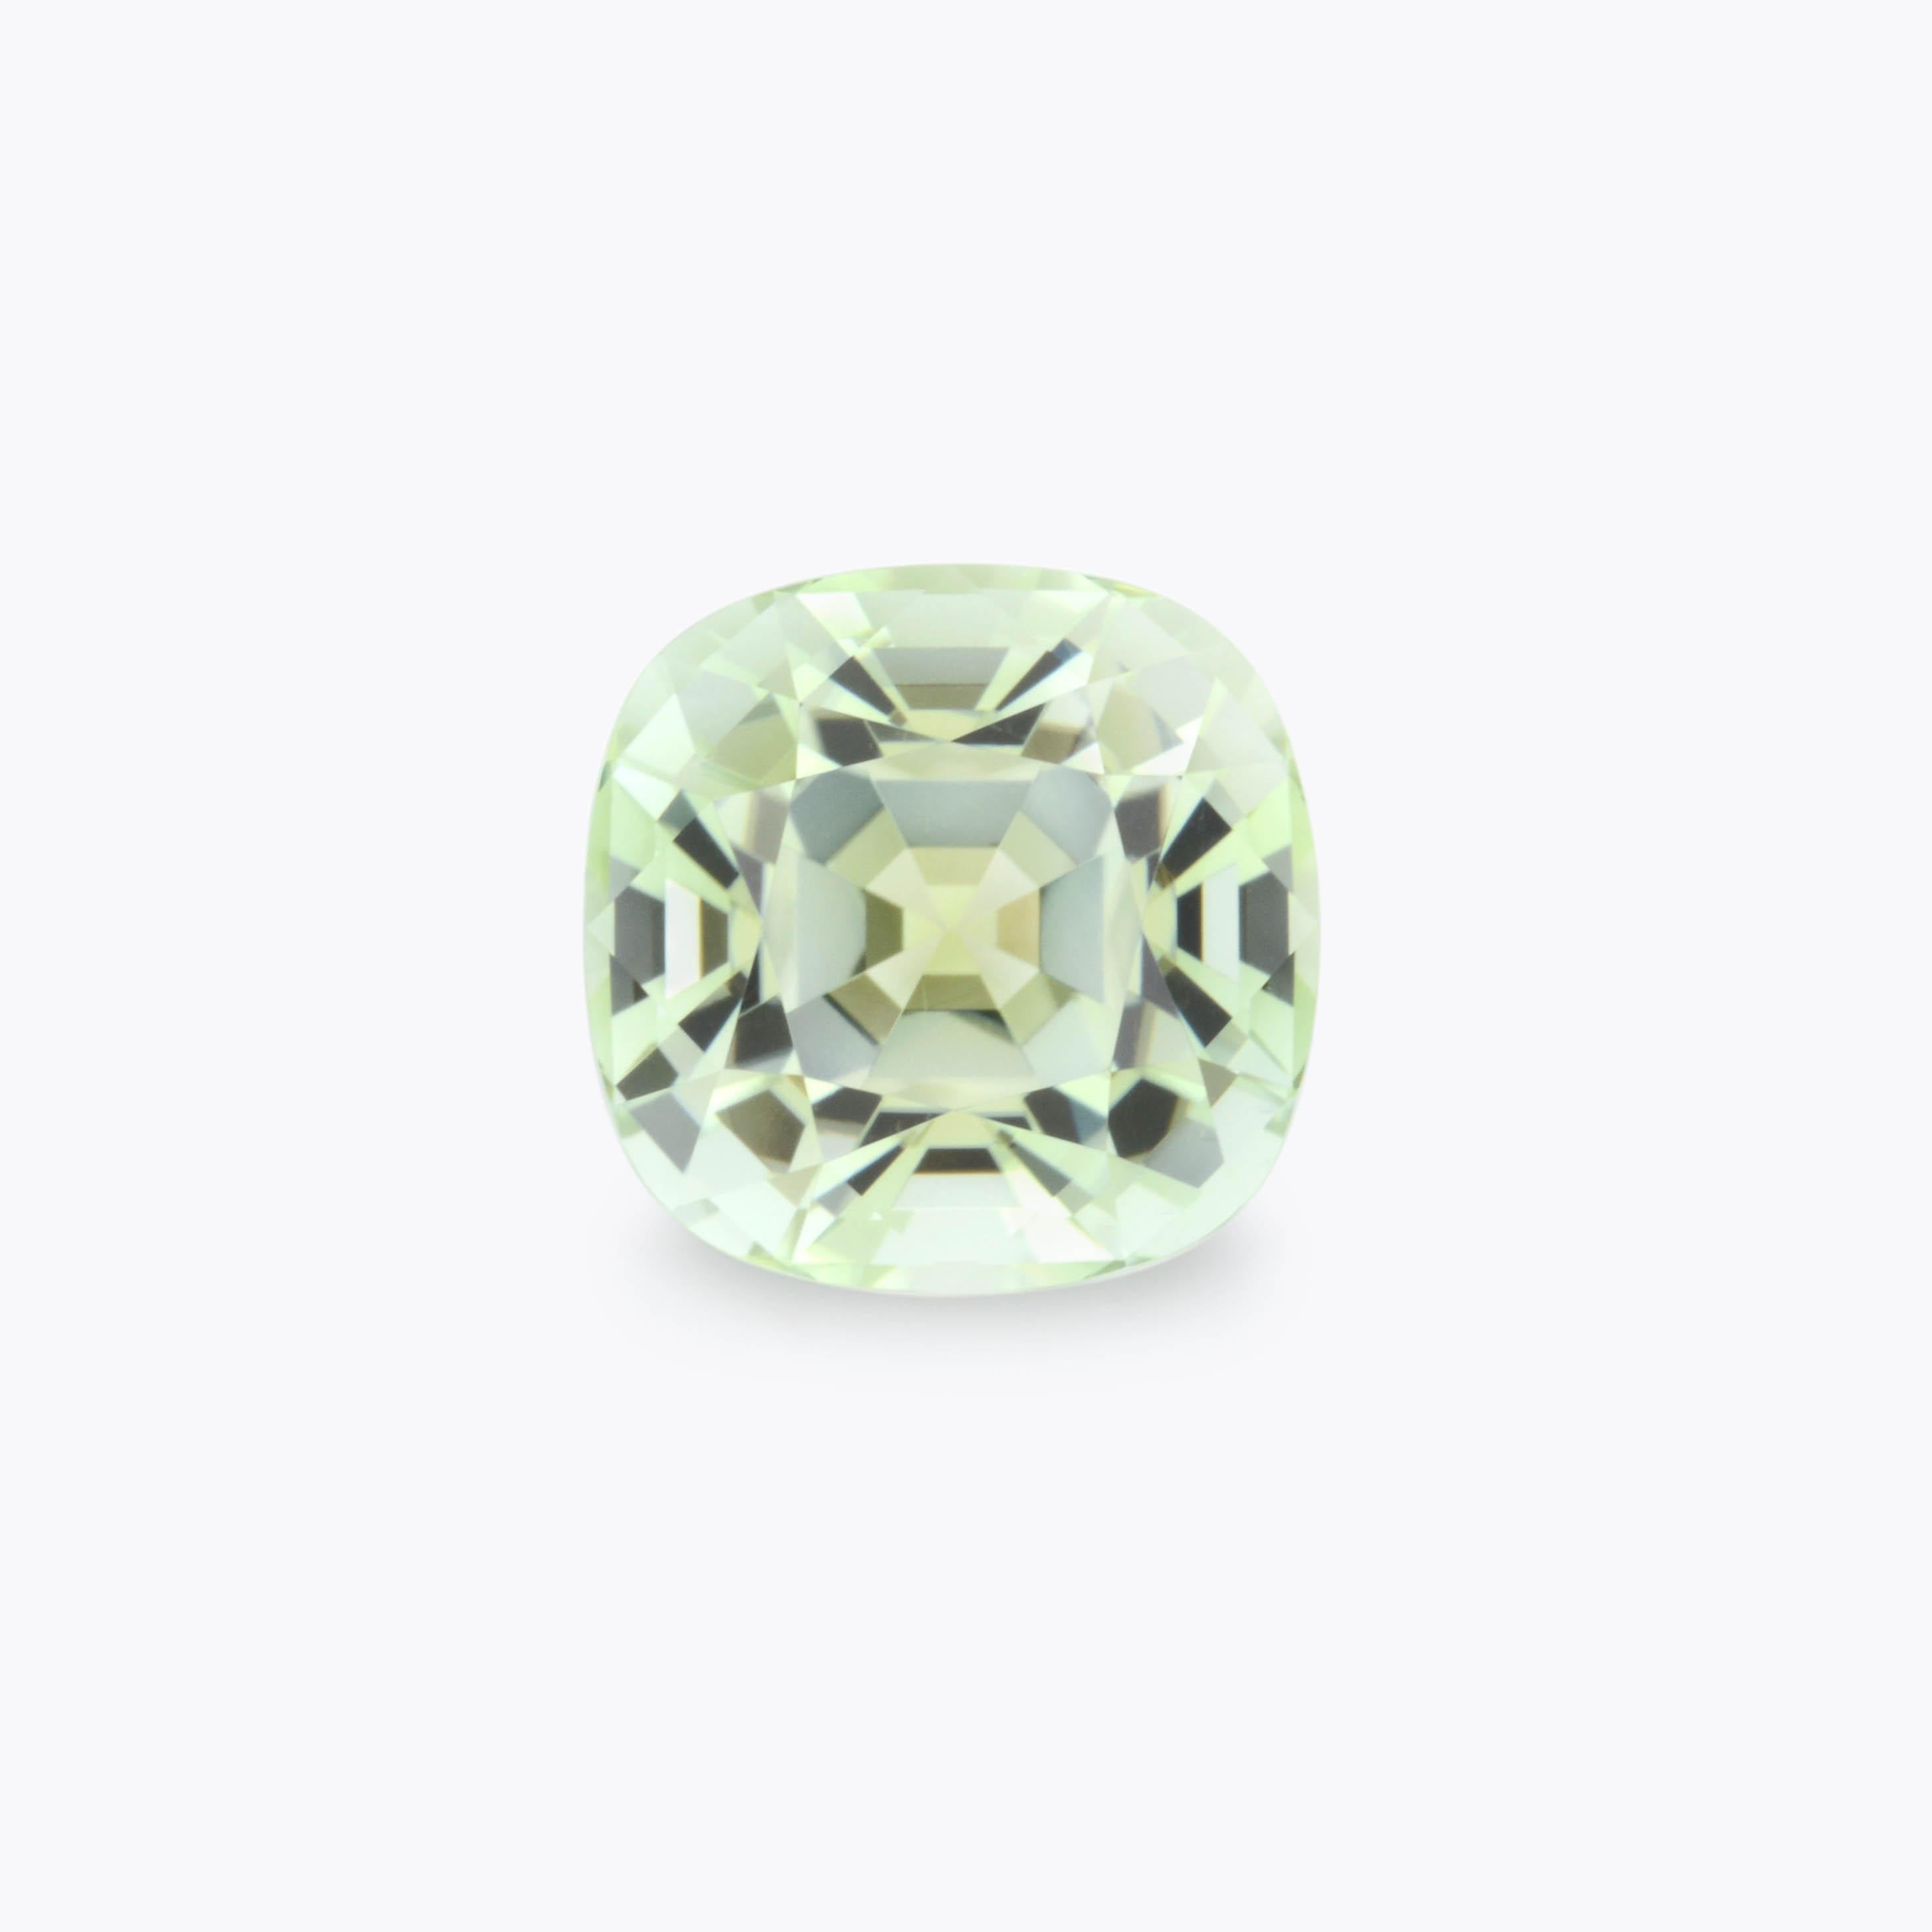 Pastel Mint Green Tourmaline cushion gem, weighing a total of 5.62 carats, offered unmounted to a fine gem enthusiast.
Dimensions: 11.7 x 11.6 x 8.0 mm.
Returns are accepted and paid by us within 7 days of delivery.
We offer supreme custom jewelry